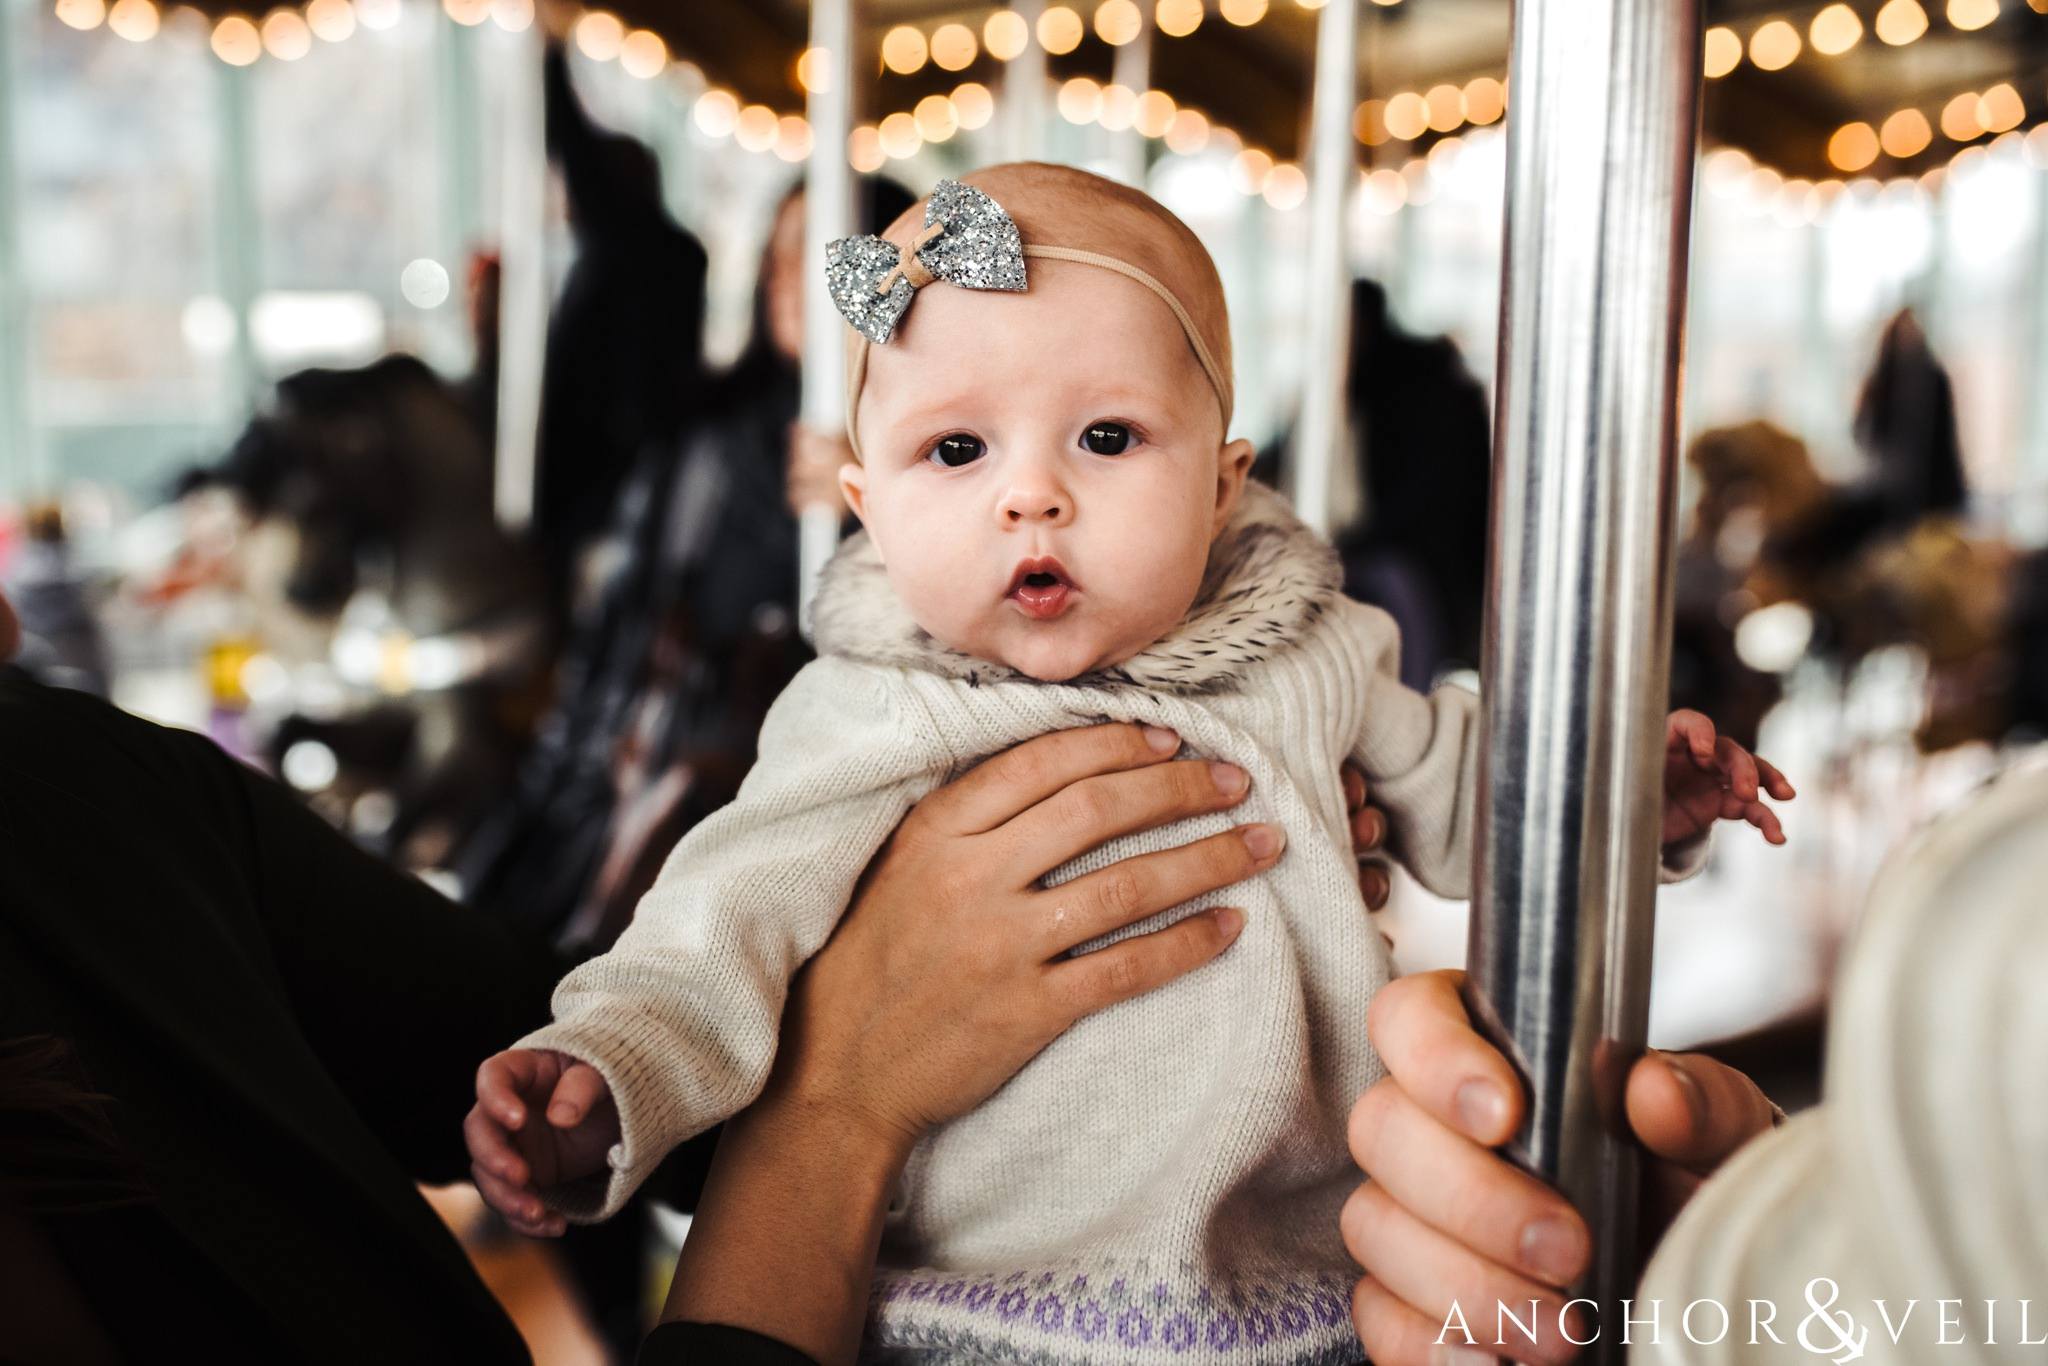 Holding the baby in the carousal During their Dumbo Brooklyn New York engagement session